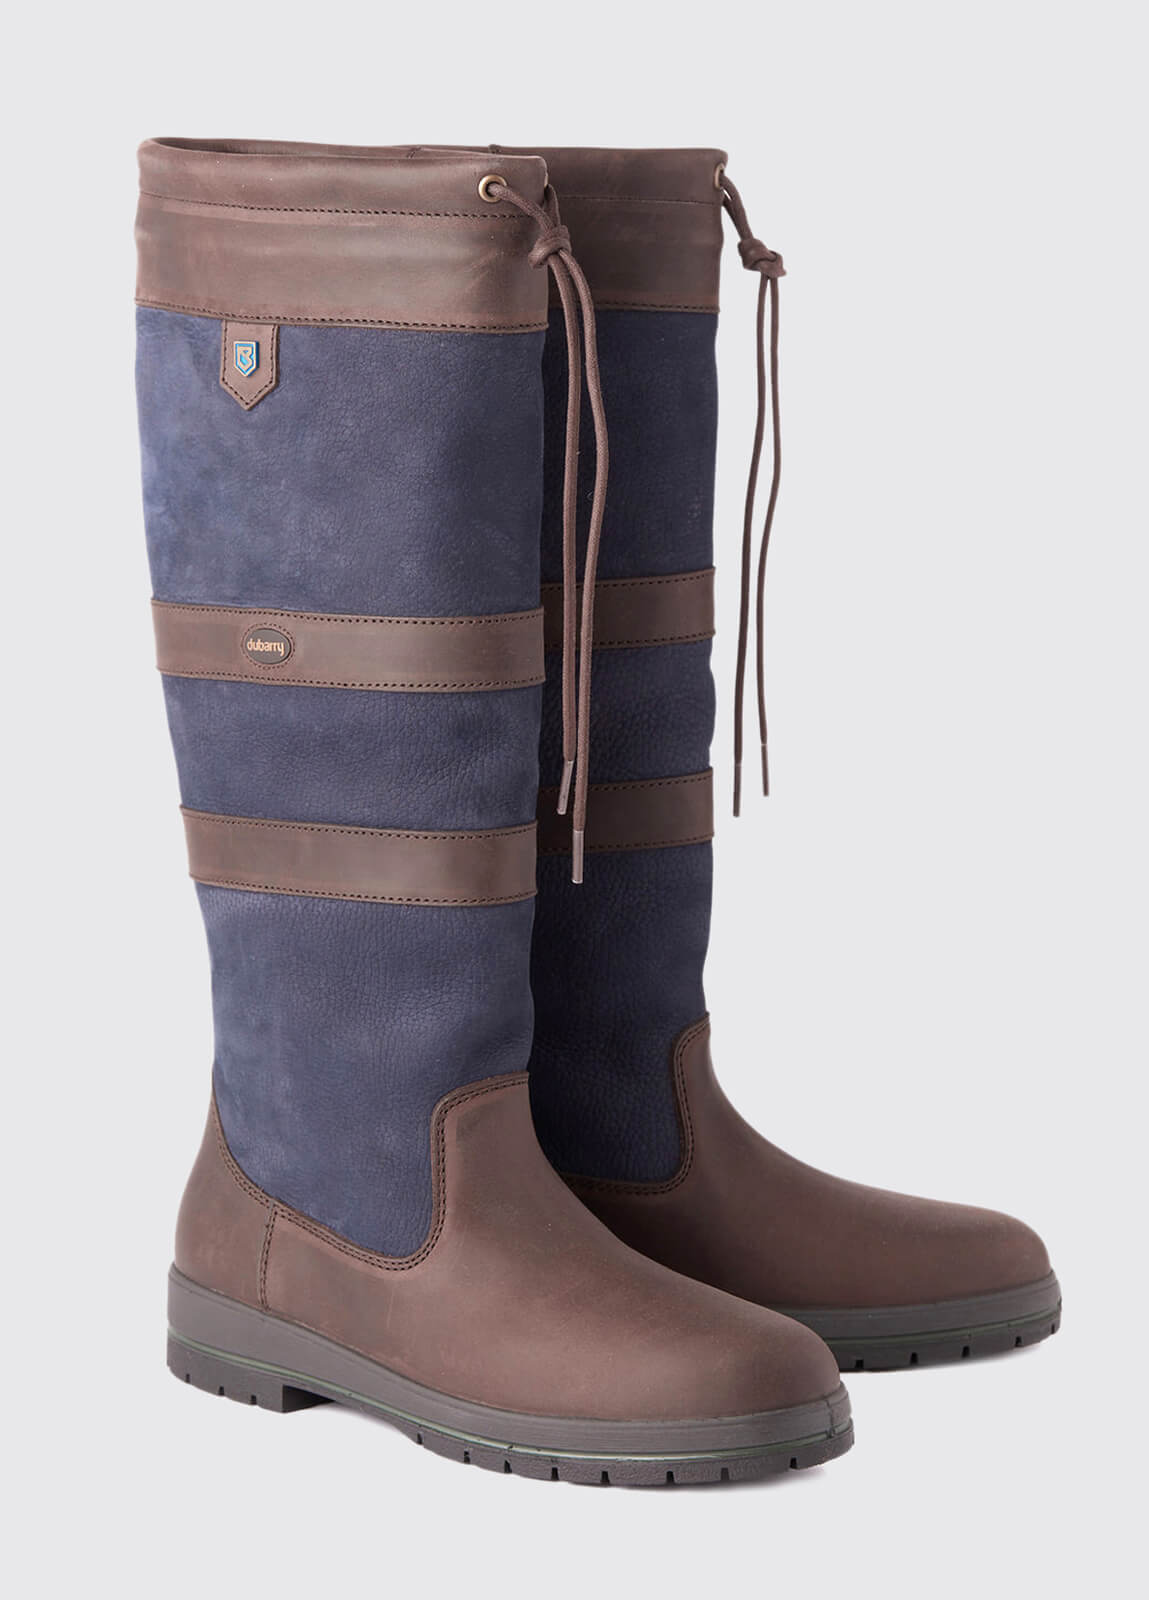 Dubarry Womens Galway Country Boot - Navy/Brown